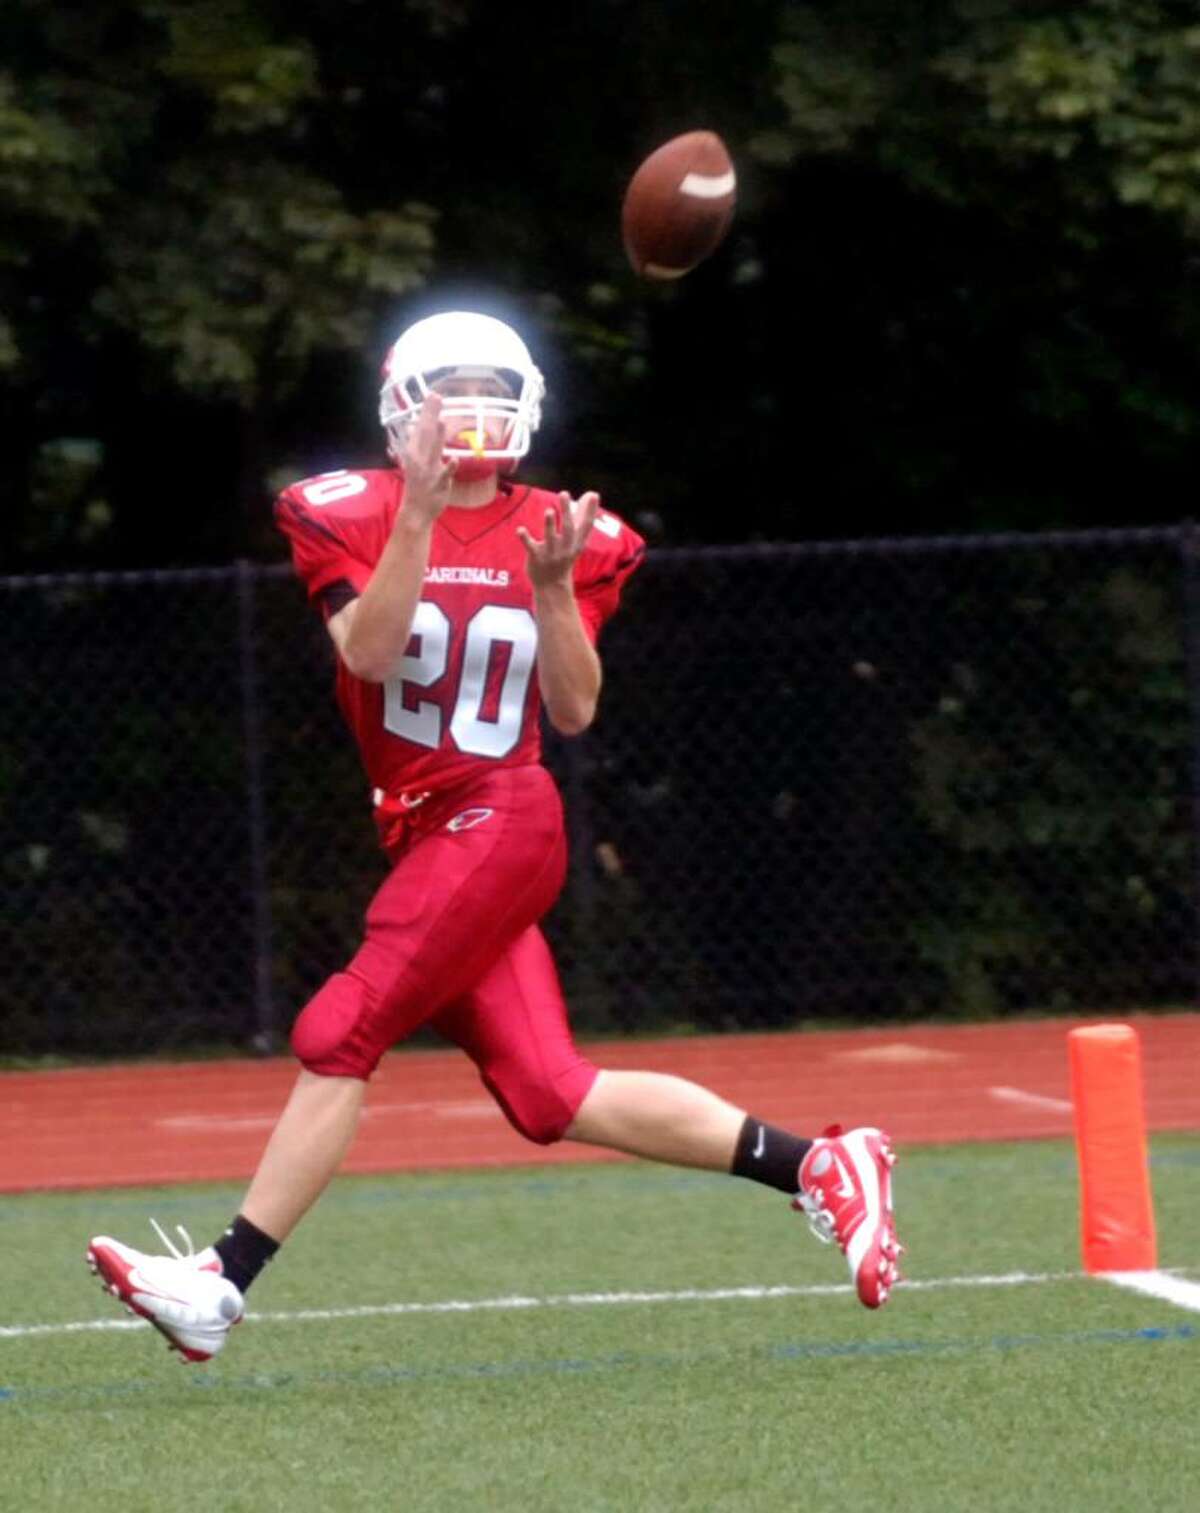 Greenwich High's Colin Dunster floats into the endzone to catch a touchdown pass as the Greenwich High football team hosts Harding High School for the Greenwich Homecoming game Saturday afternoon, Oct. 3, 2009.